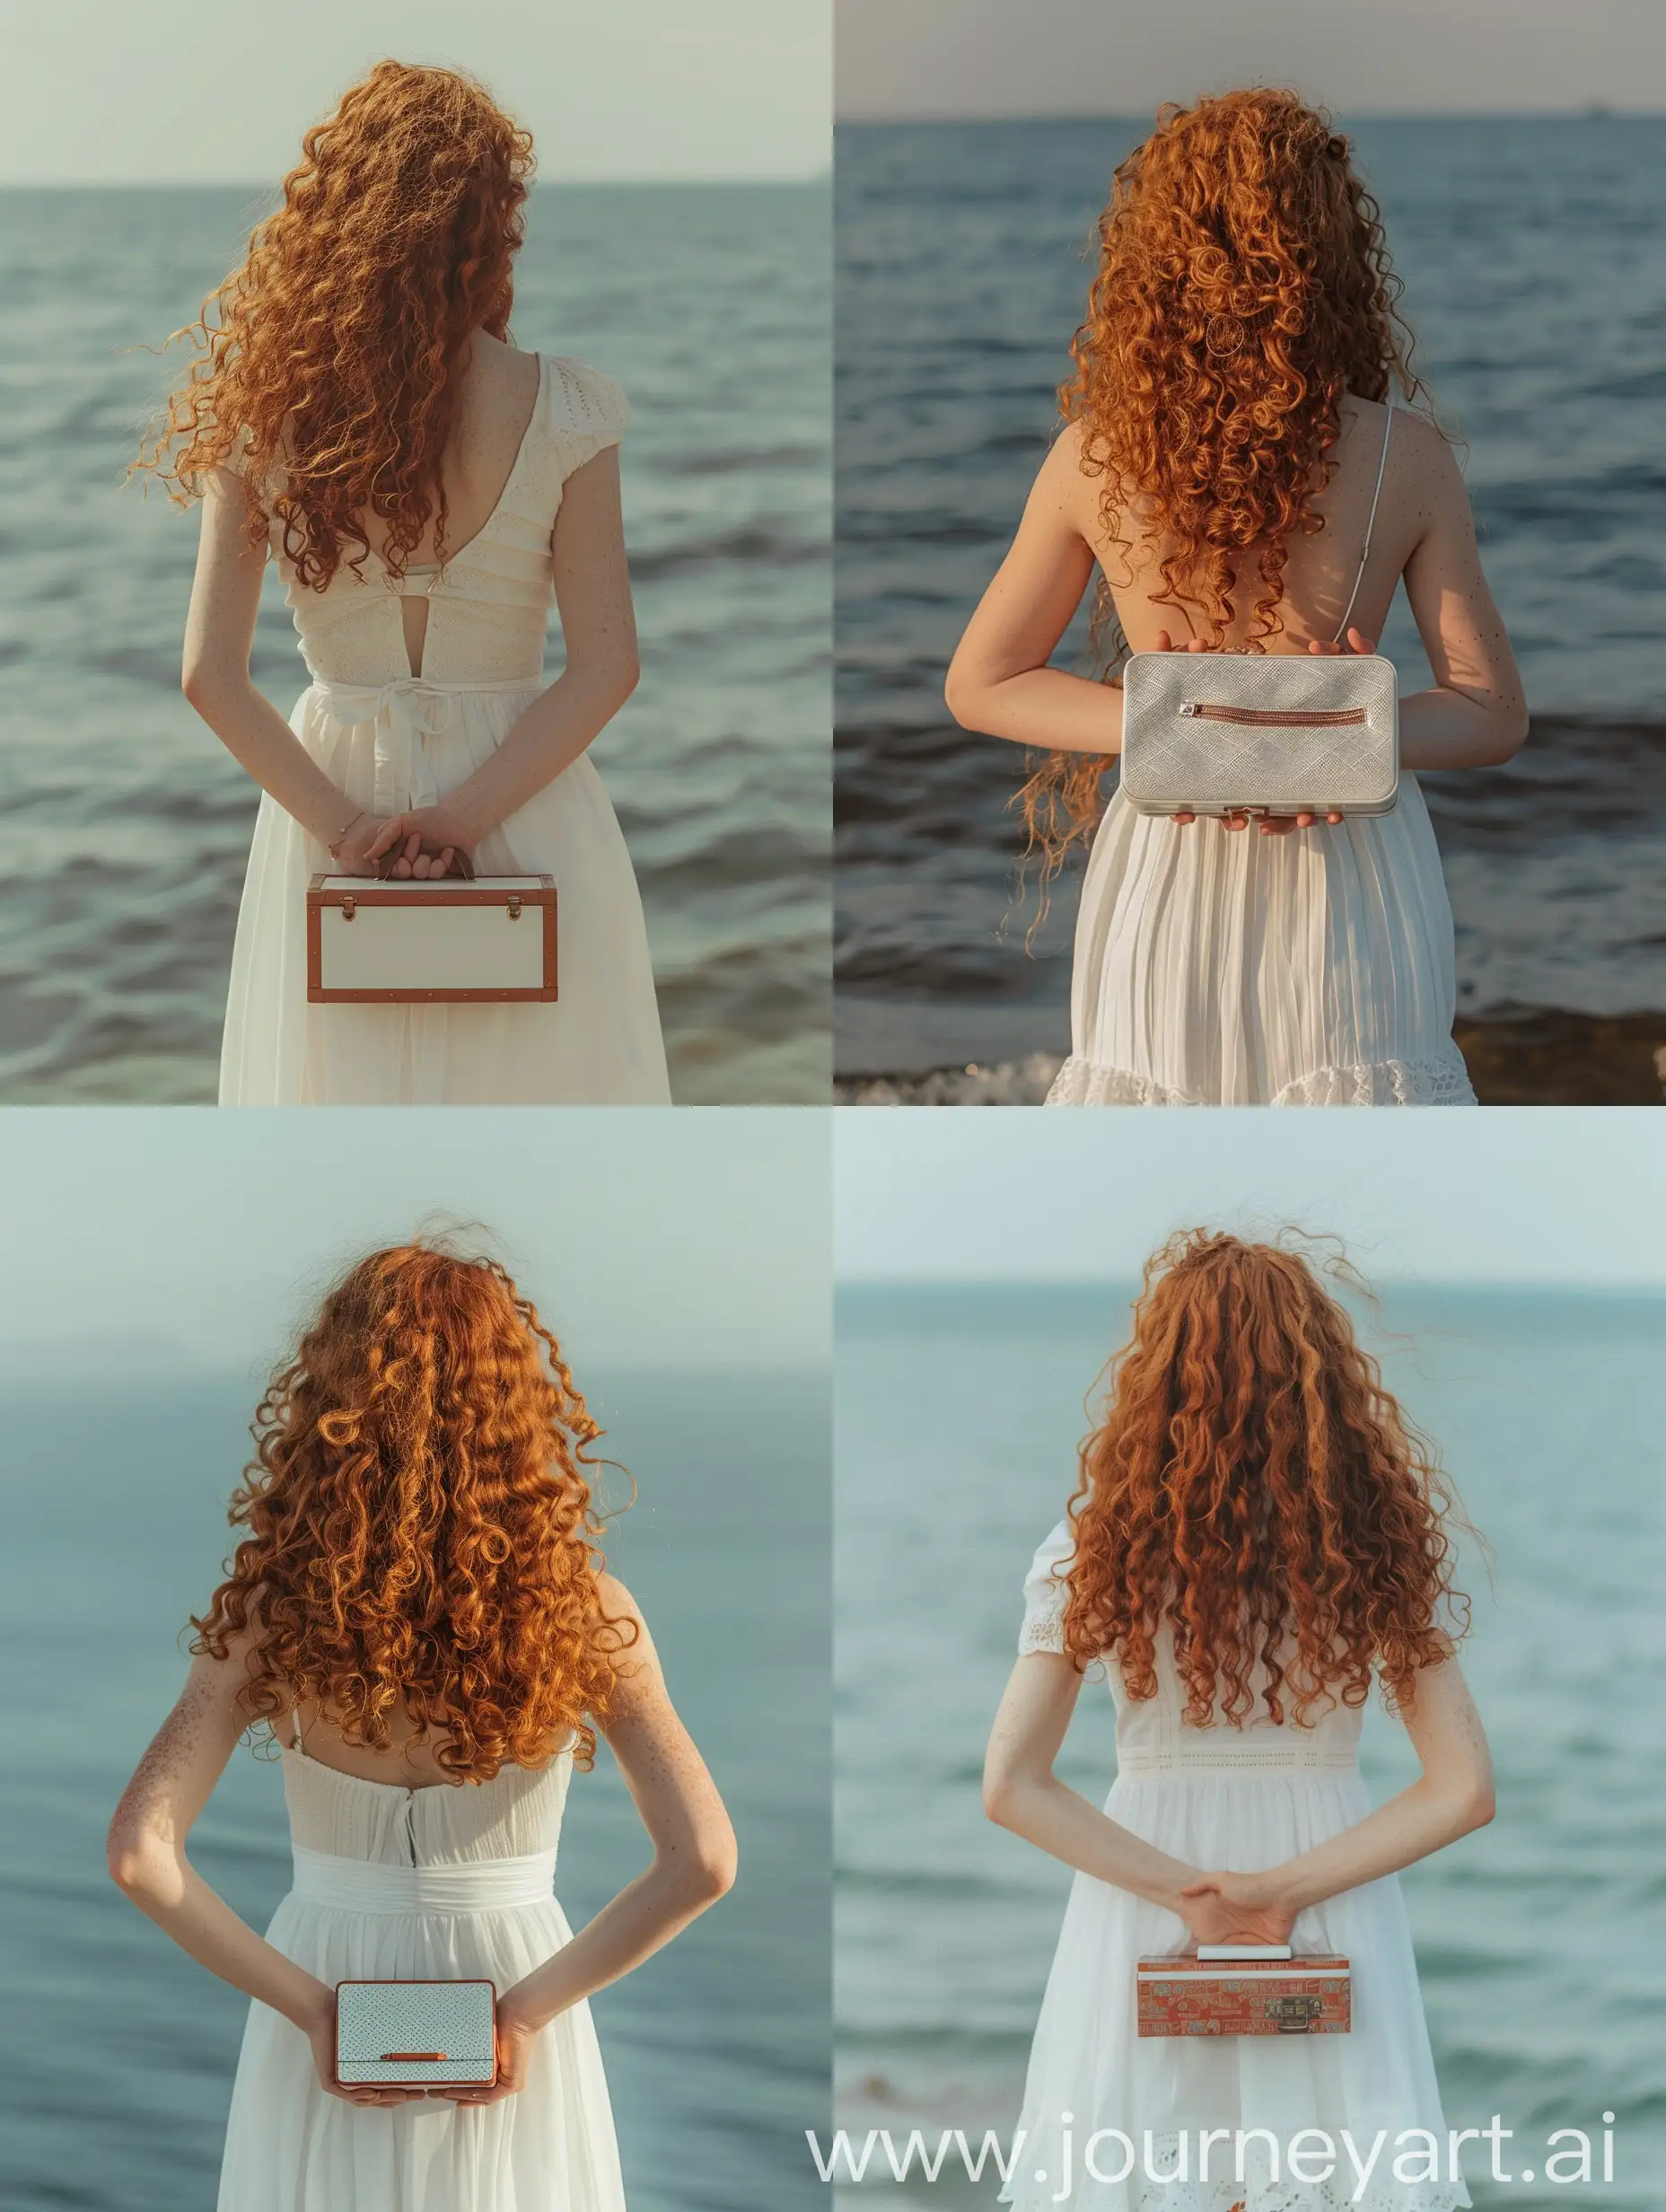 RedHaired-Girl-with-Suitcase-by-the-Sea